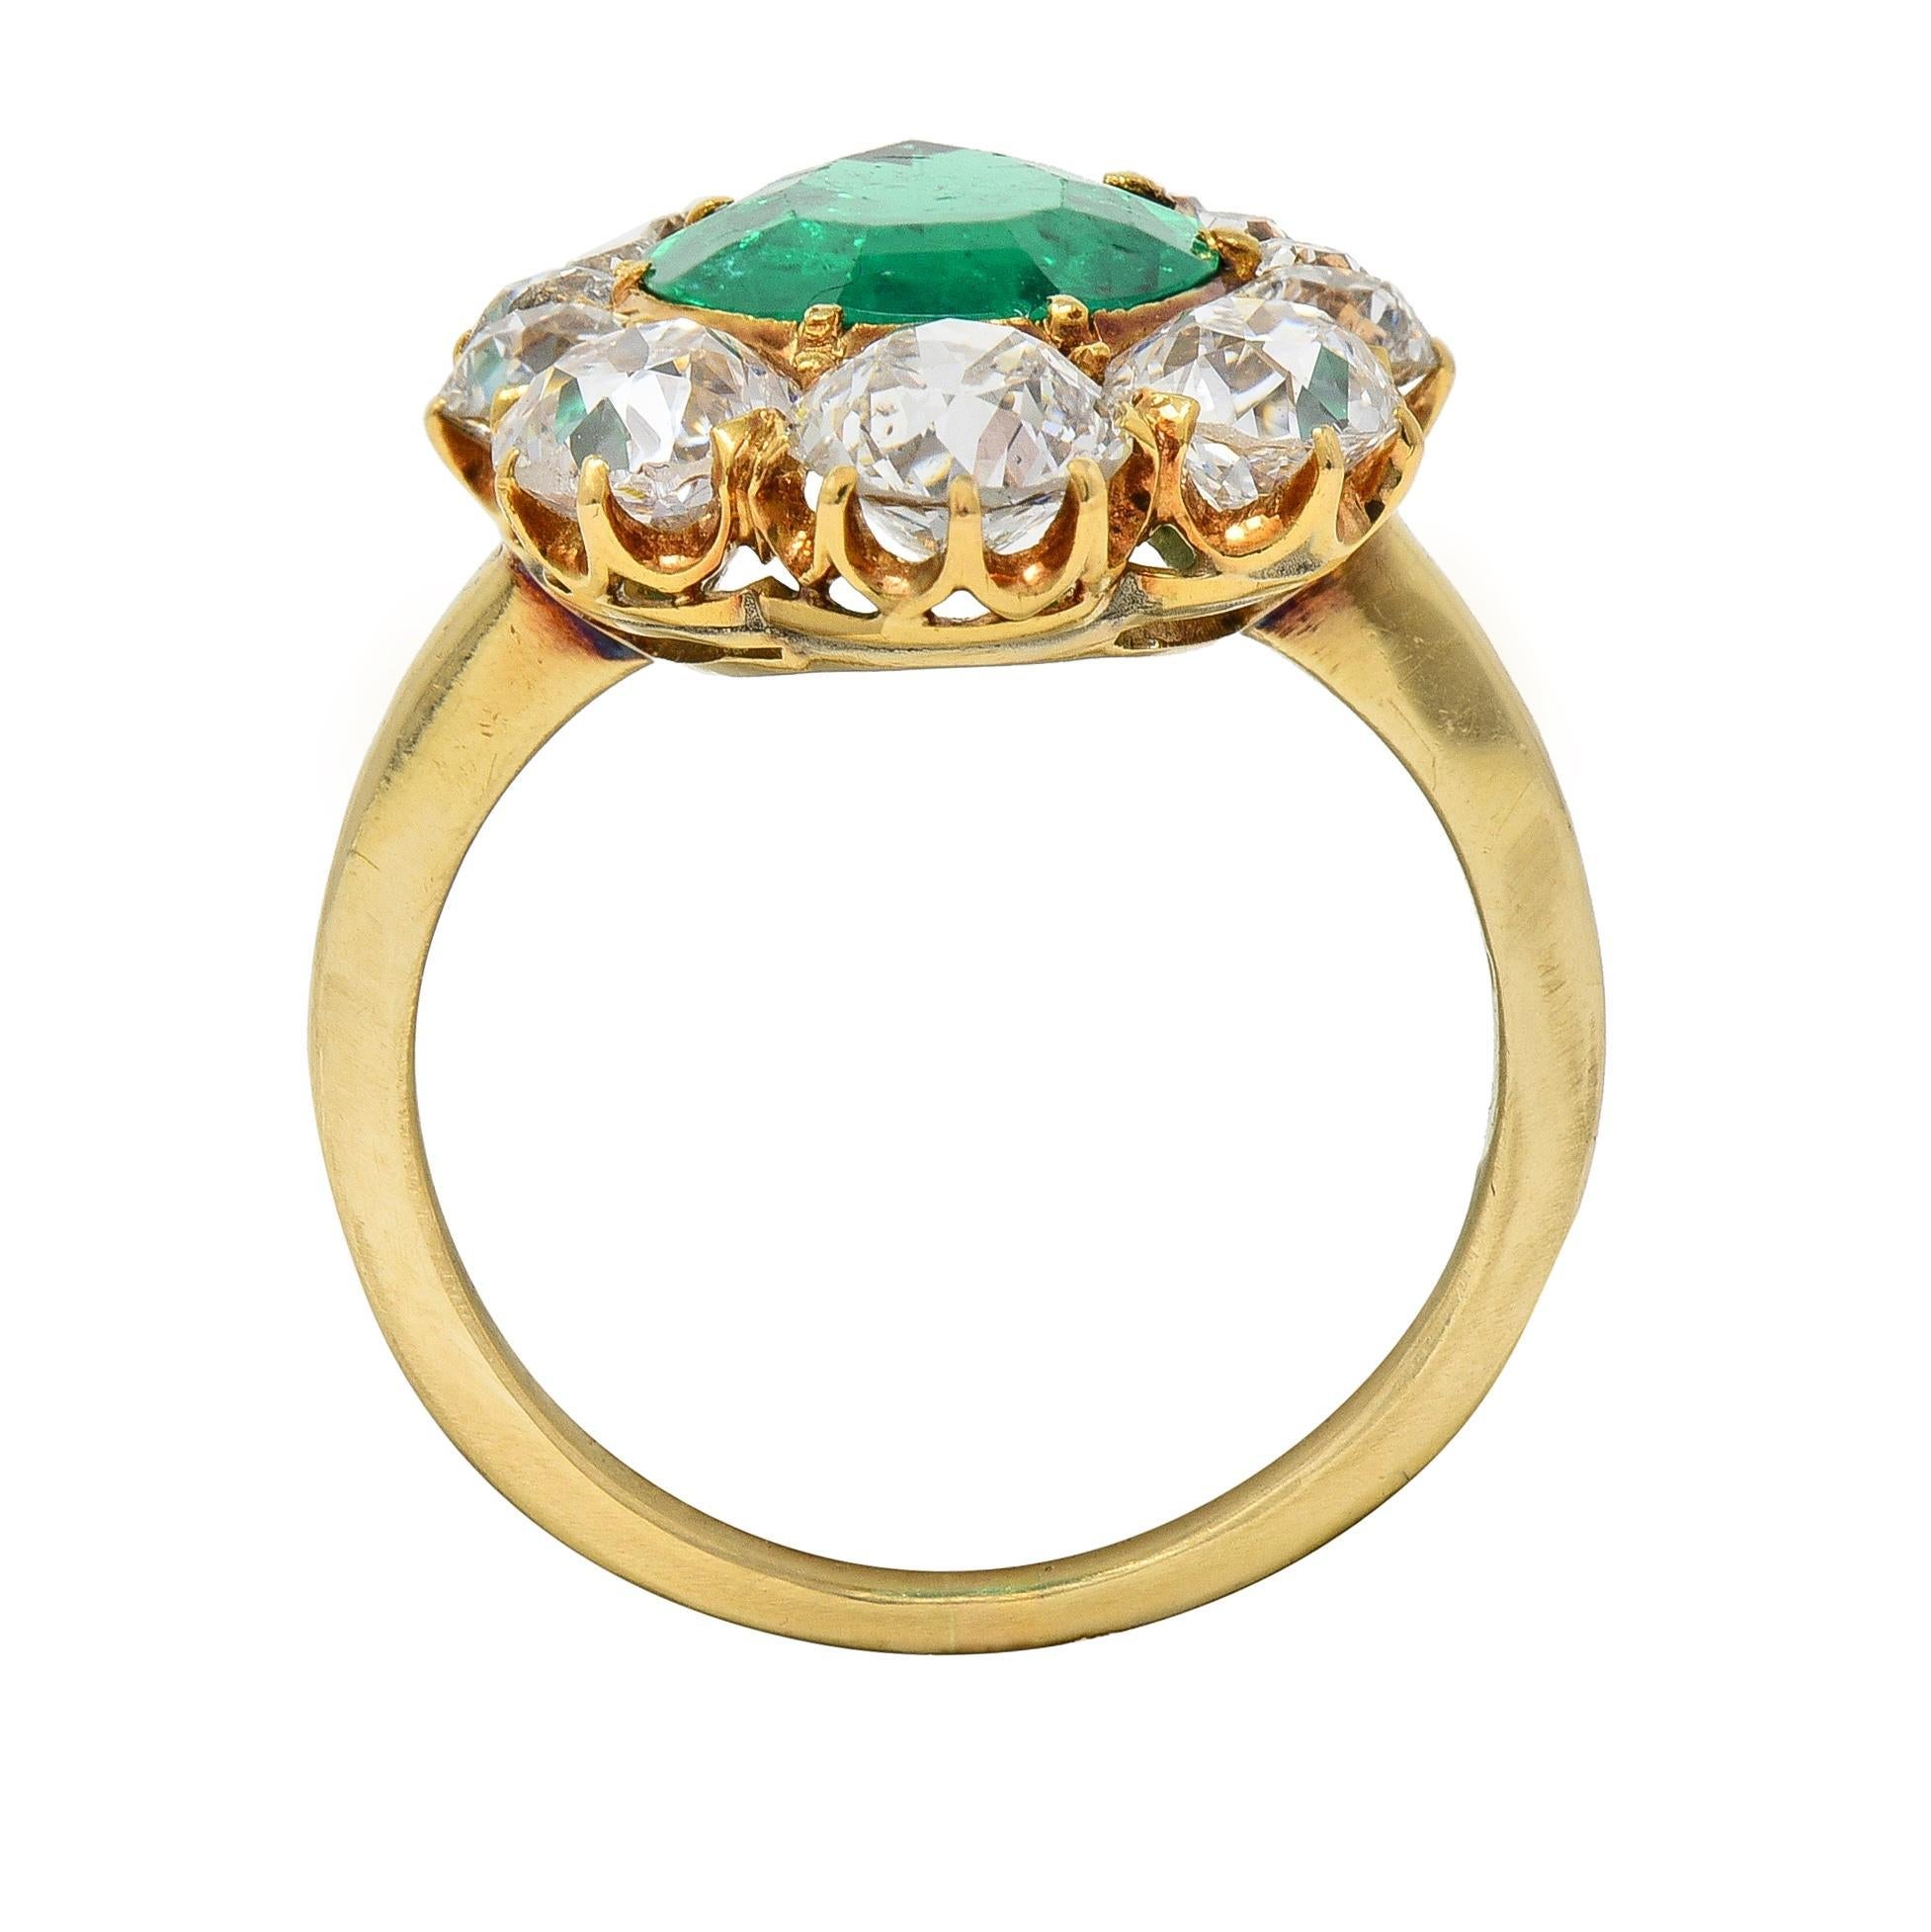 Late Victorian 5.34 CTW Pear Colombian Emerald Diamond 18 Karat Gold Ring AGL For Sale 3